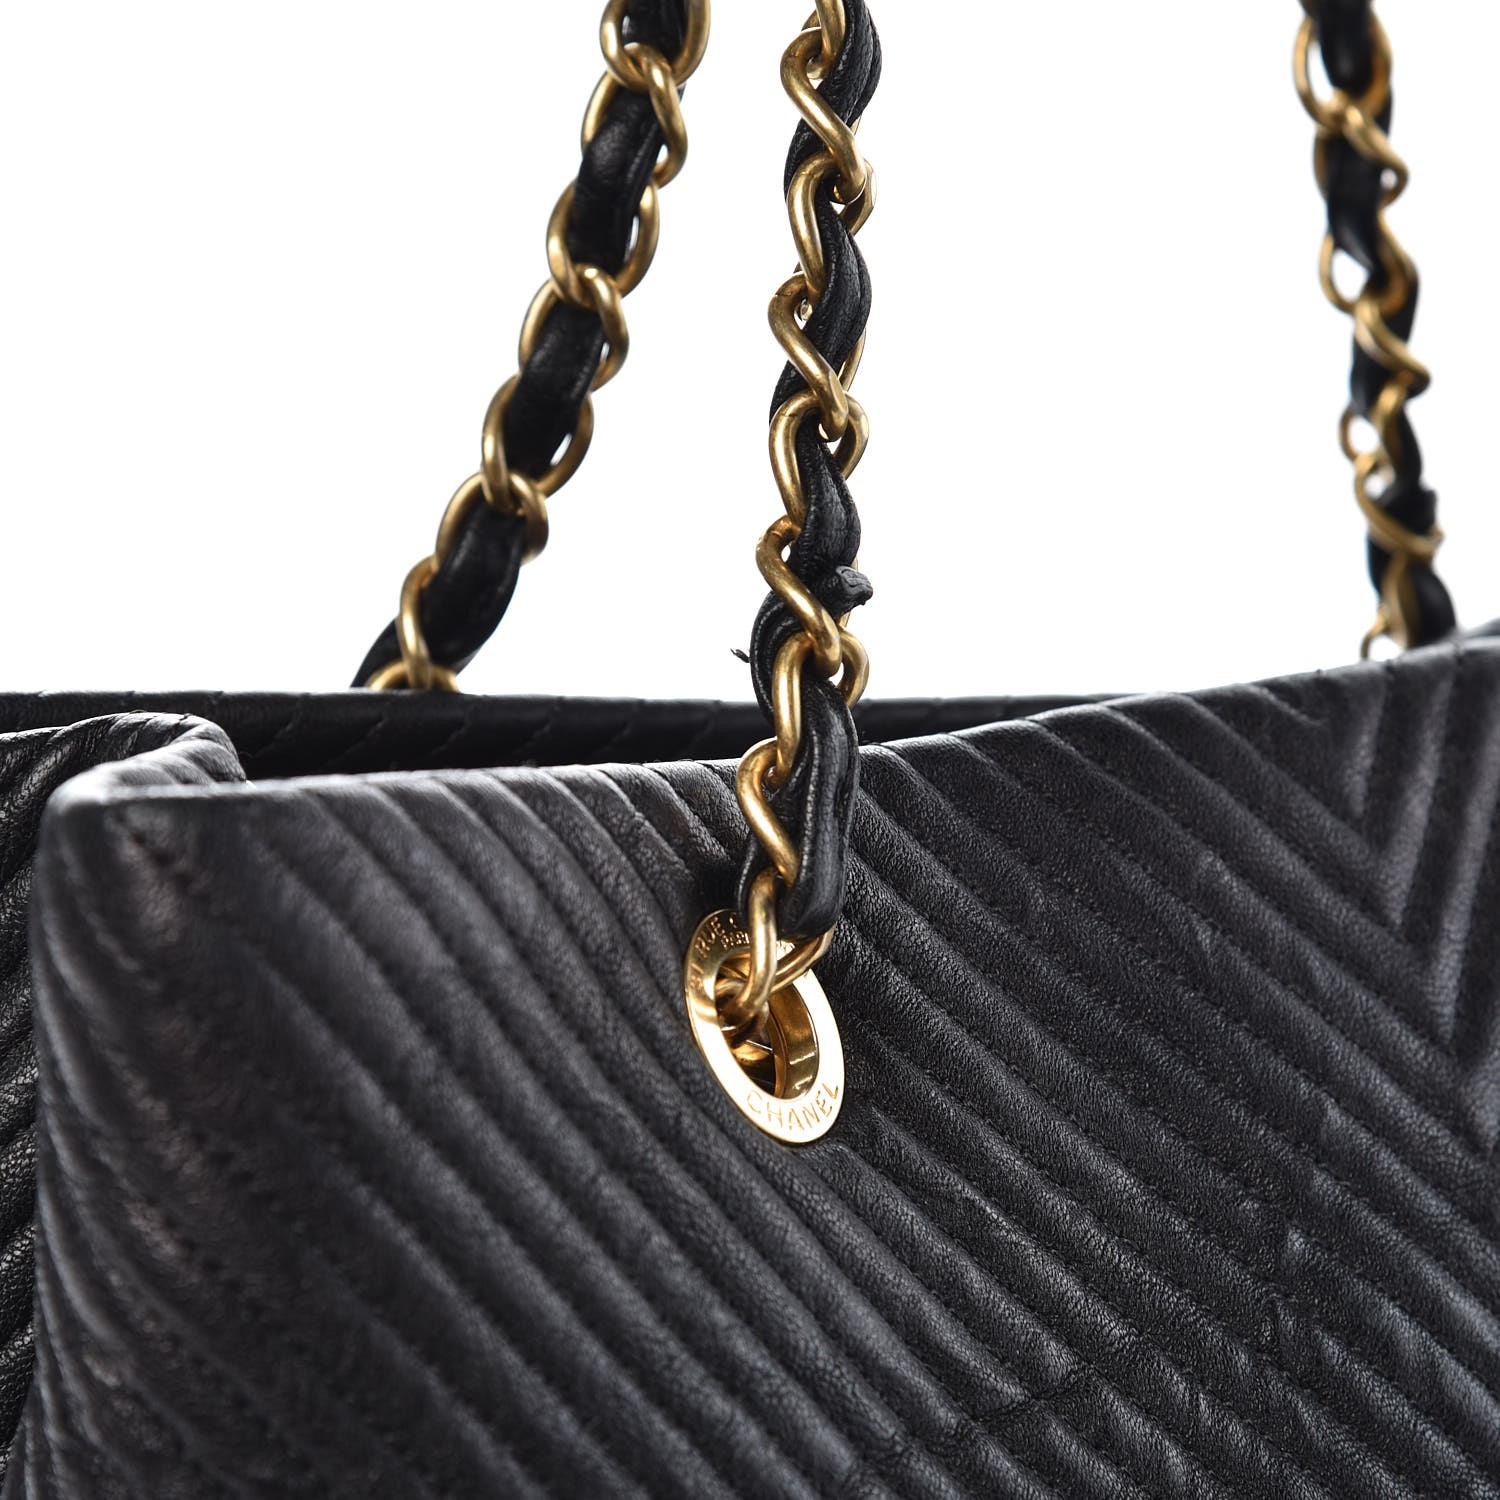 CHANEL Wrinkled Lambskin Chevron Quilted Large Surpique Tote Black 348170